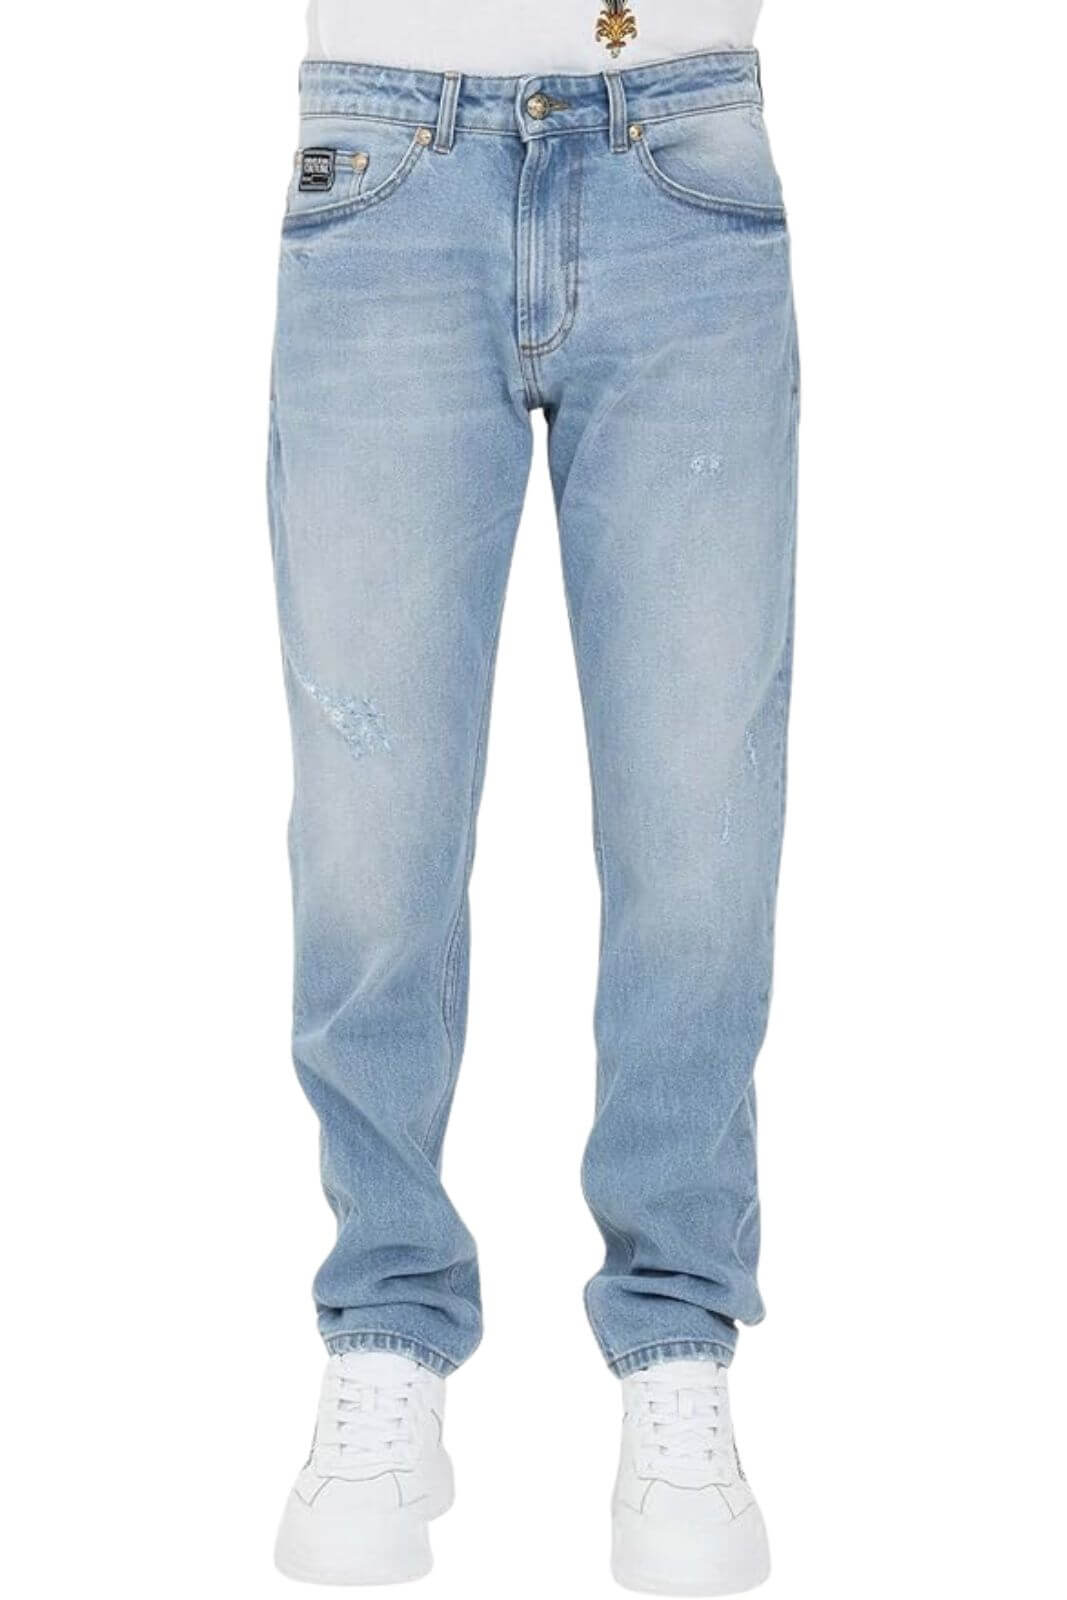 Versace Jeans Couture Jeans Uomo NARROW